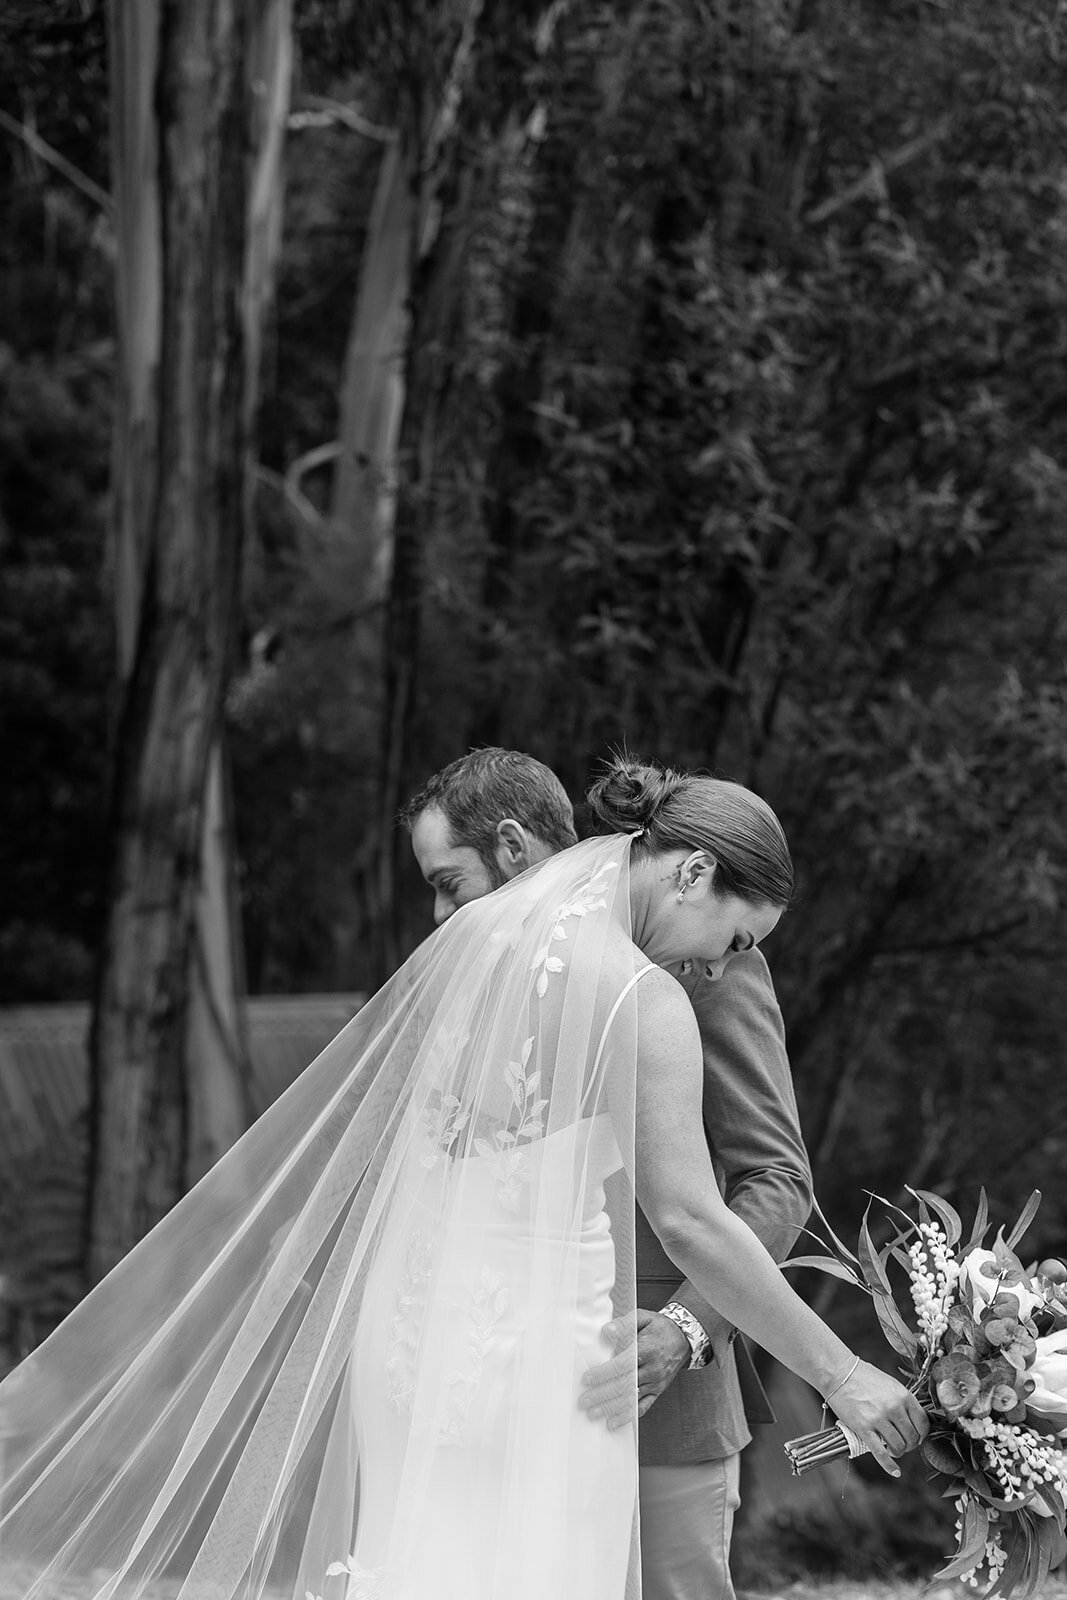 Stacey&Cory-Coast&Pines-62